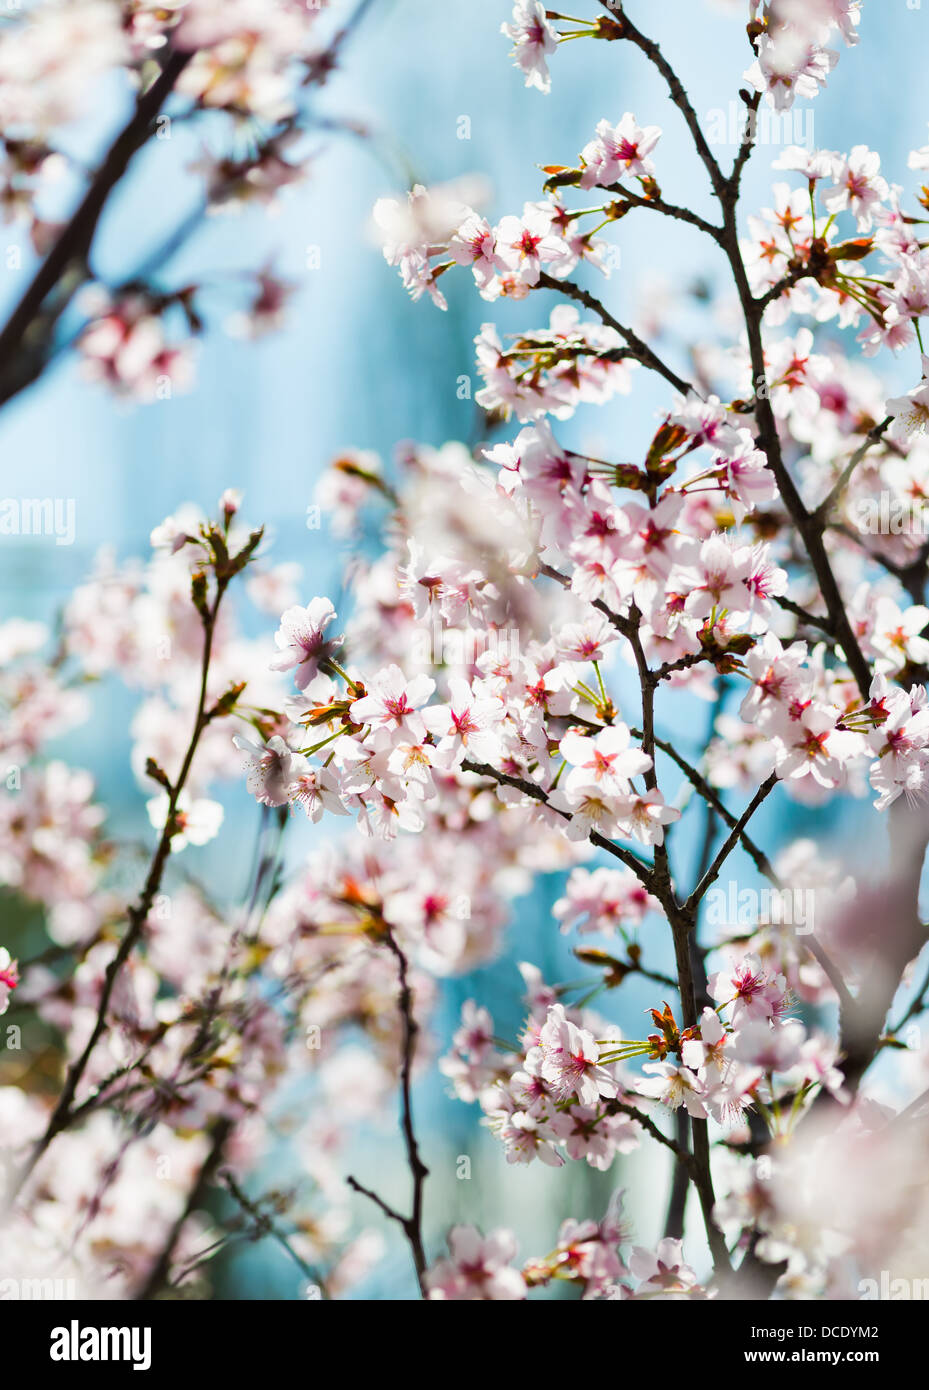 spring tree almonds flowers blossoming blossom branch life pink still plant background outdoor blooming soft nobody natural flor Stock Photo